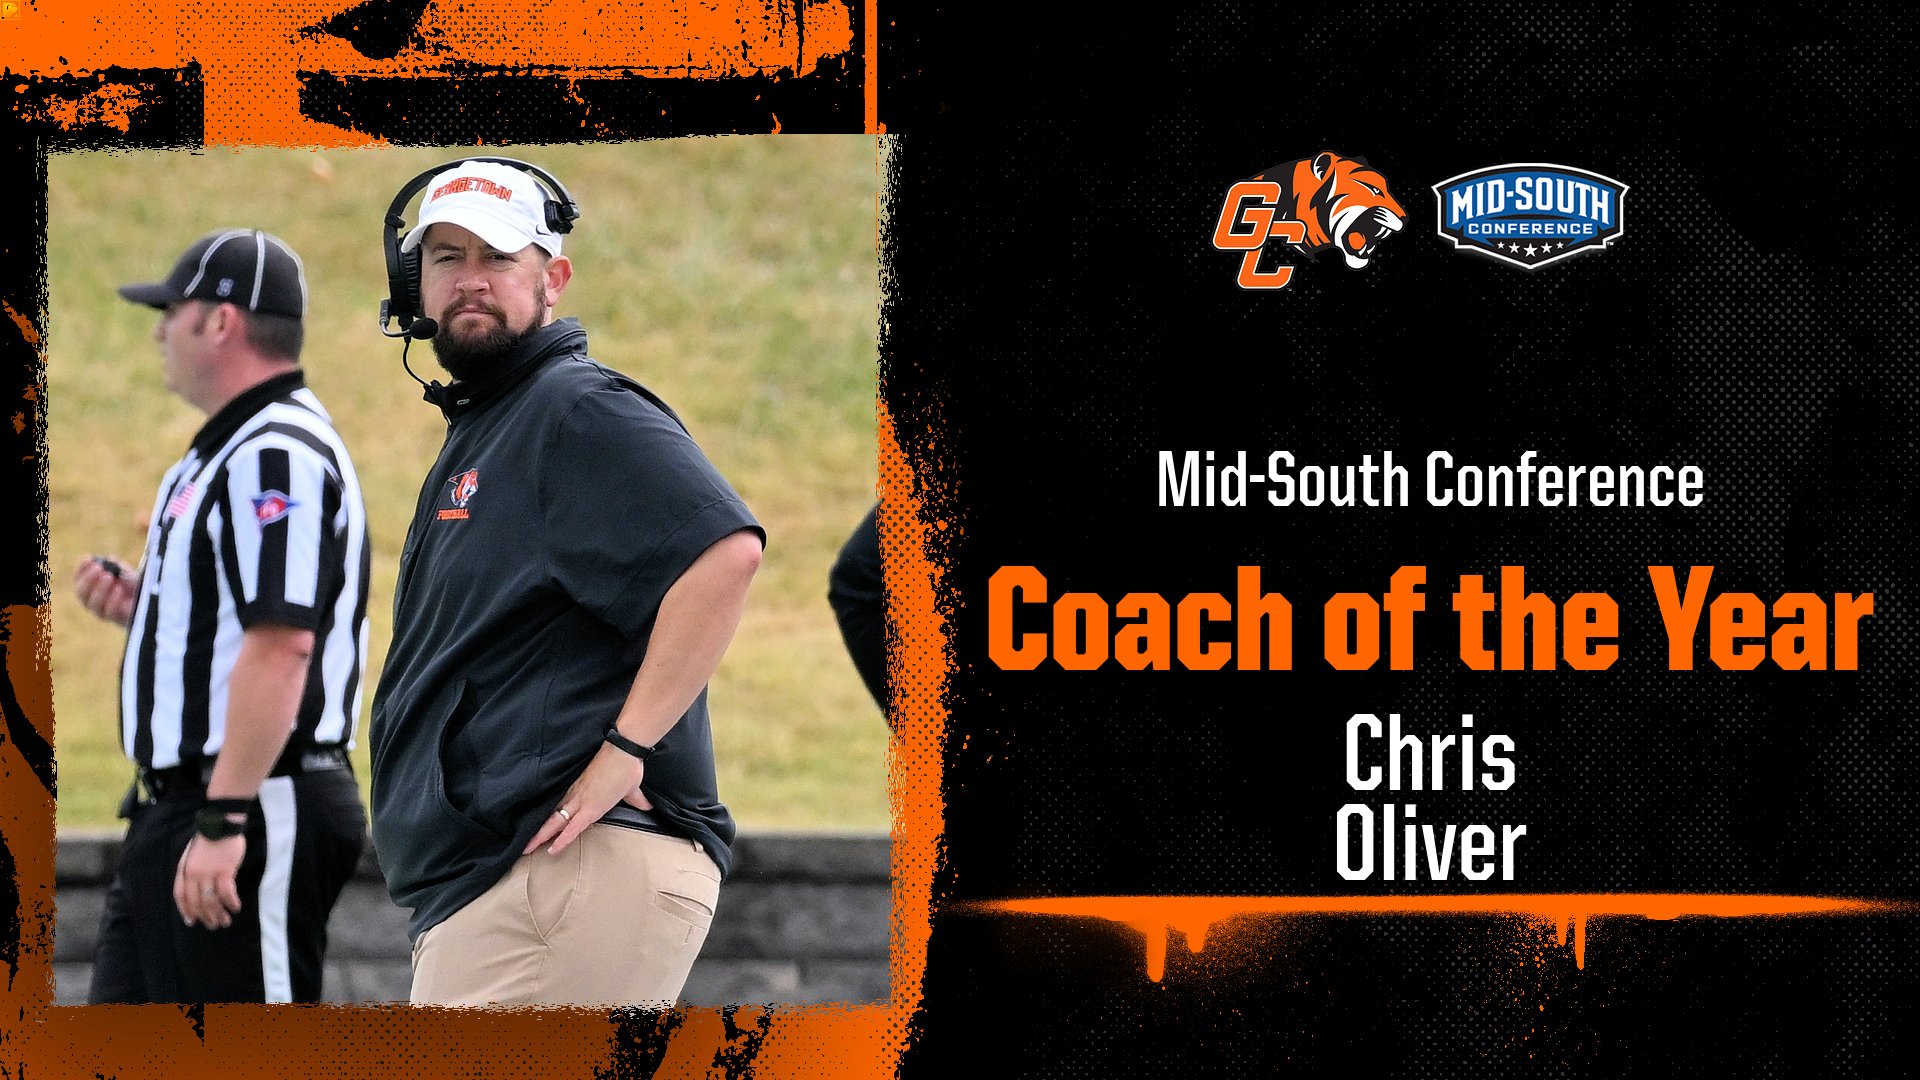 Tigers dominate MSC Awards, Oliver named Coach of the Year